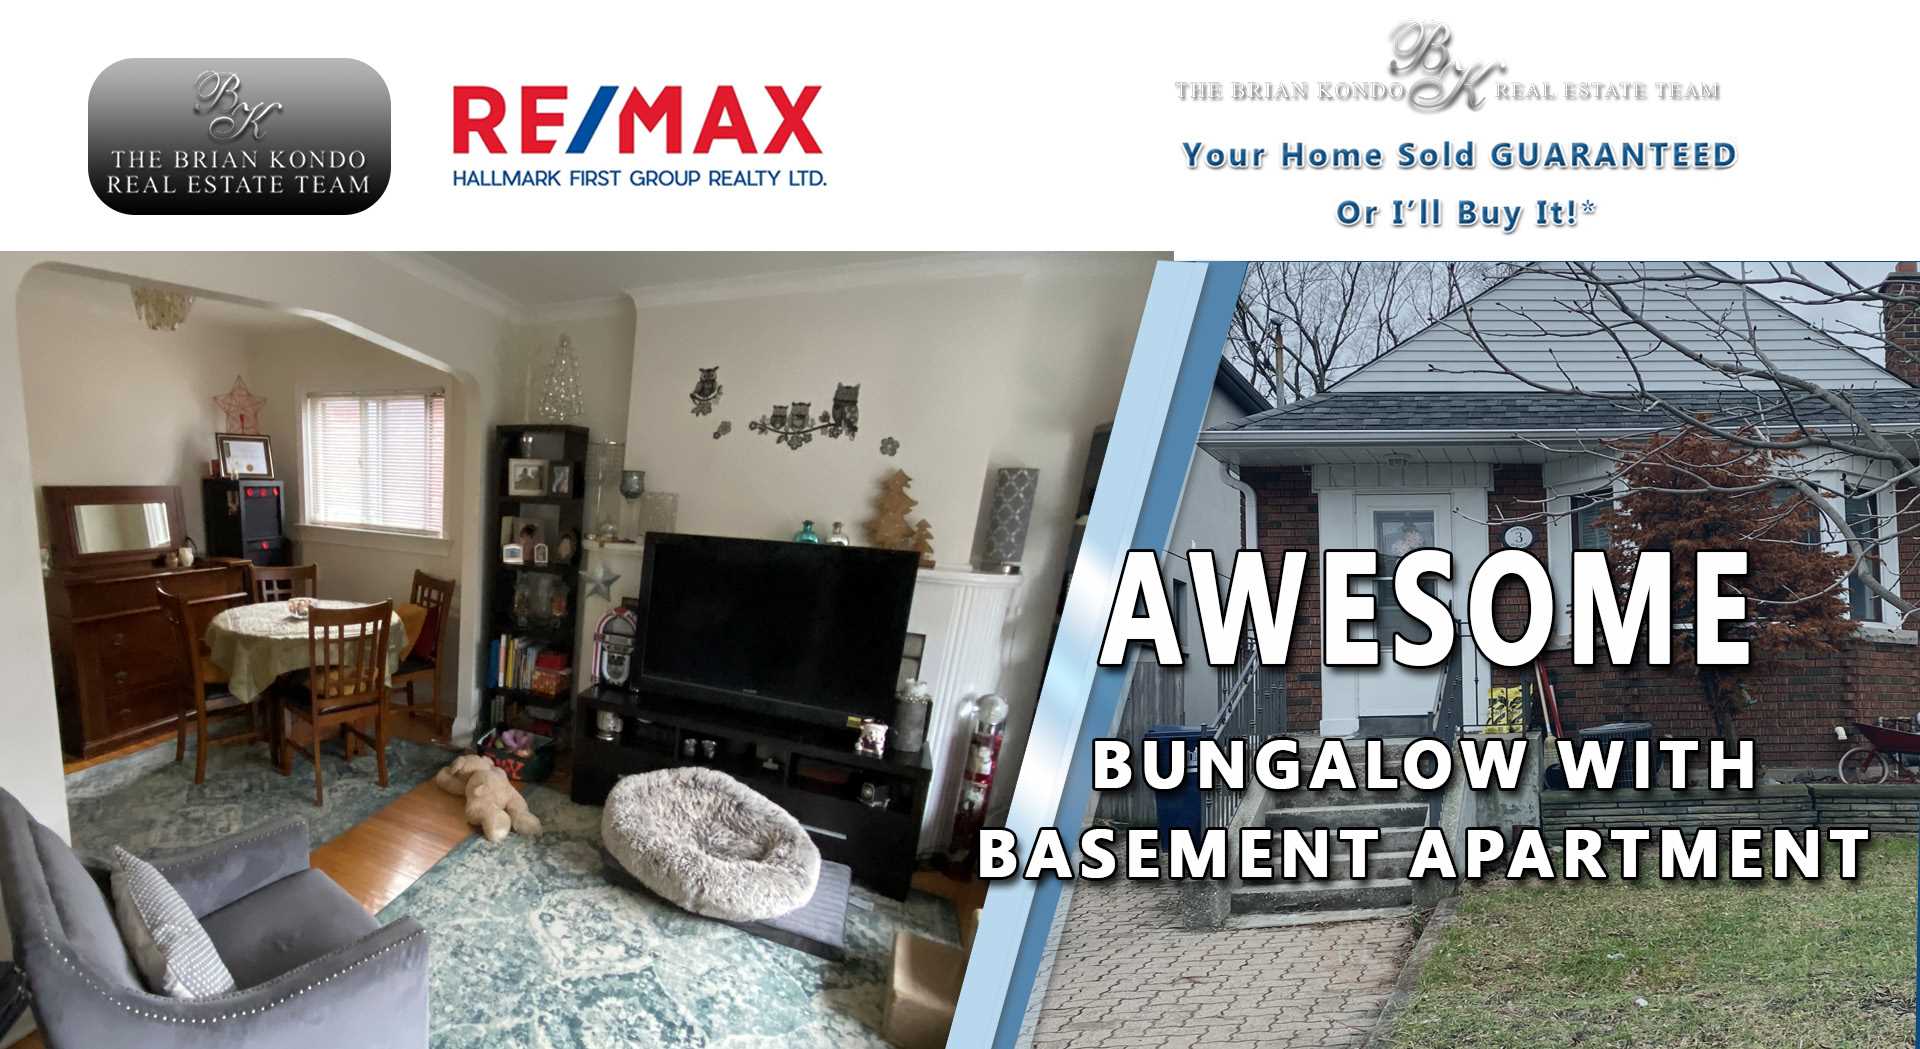 AWESOME BUNGALOW WITH BASEMENT APARTMENT FOR SALE! | The Brian Kondo Real Estate Team